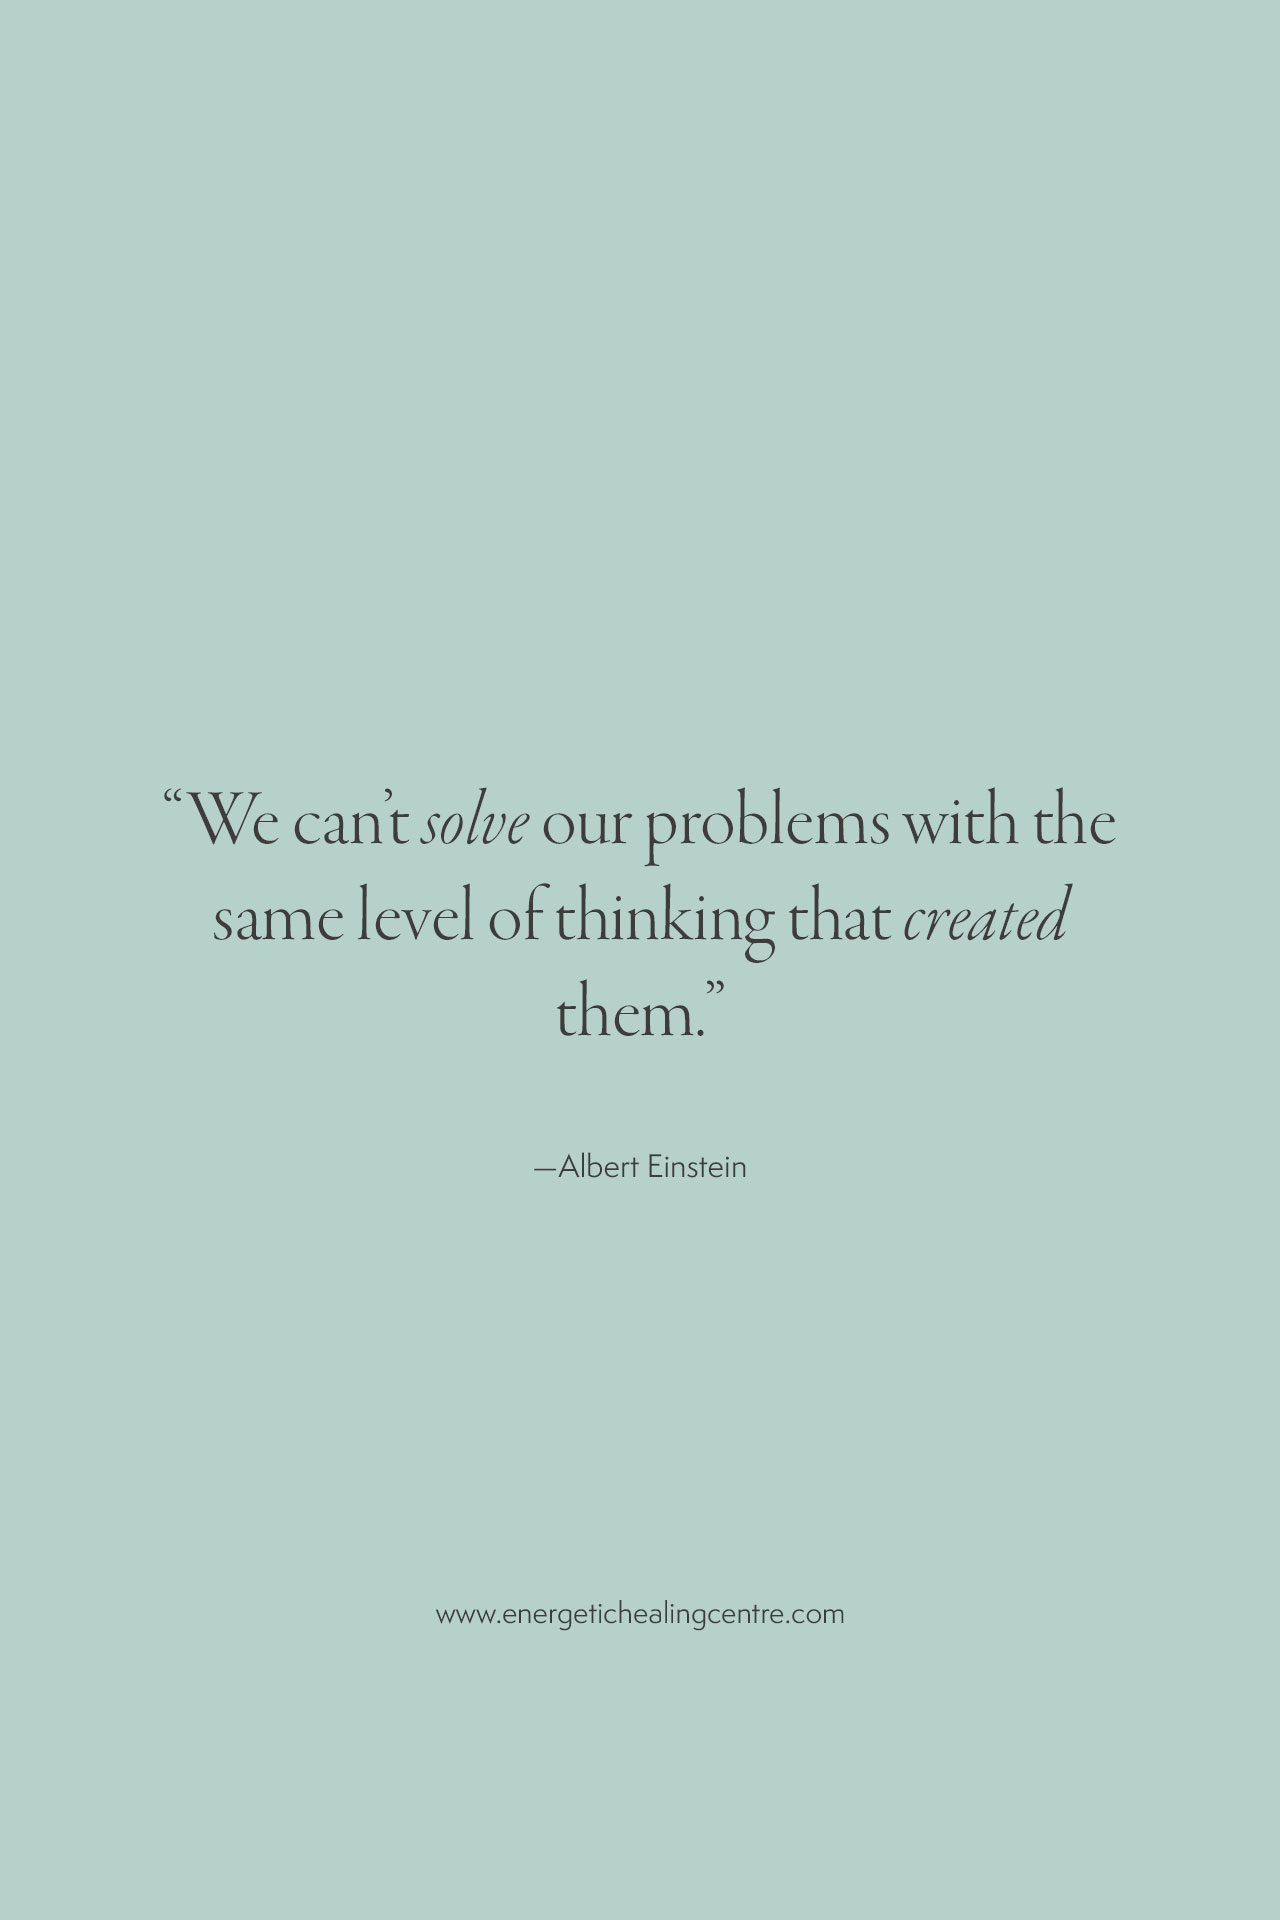 We can't solve our problems with the same level of thinking that created them.